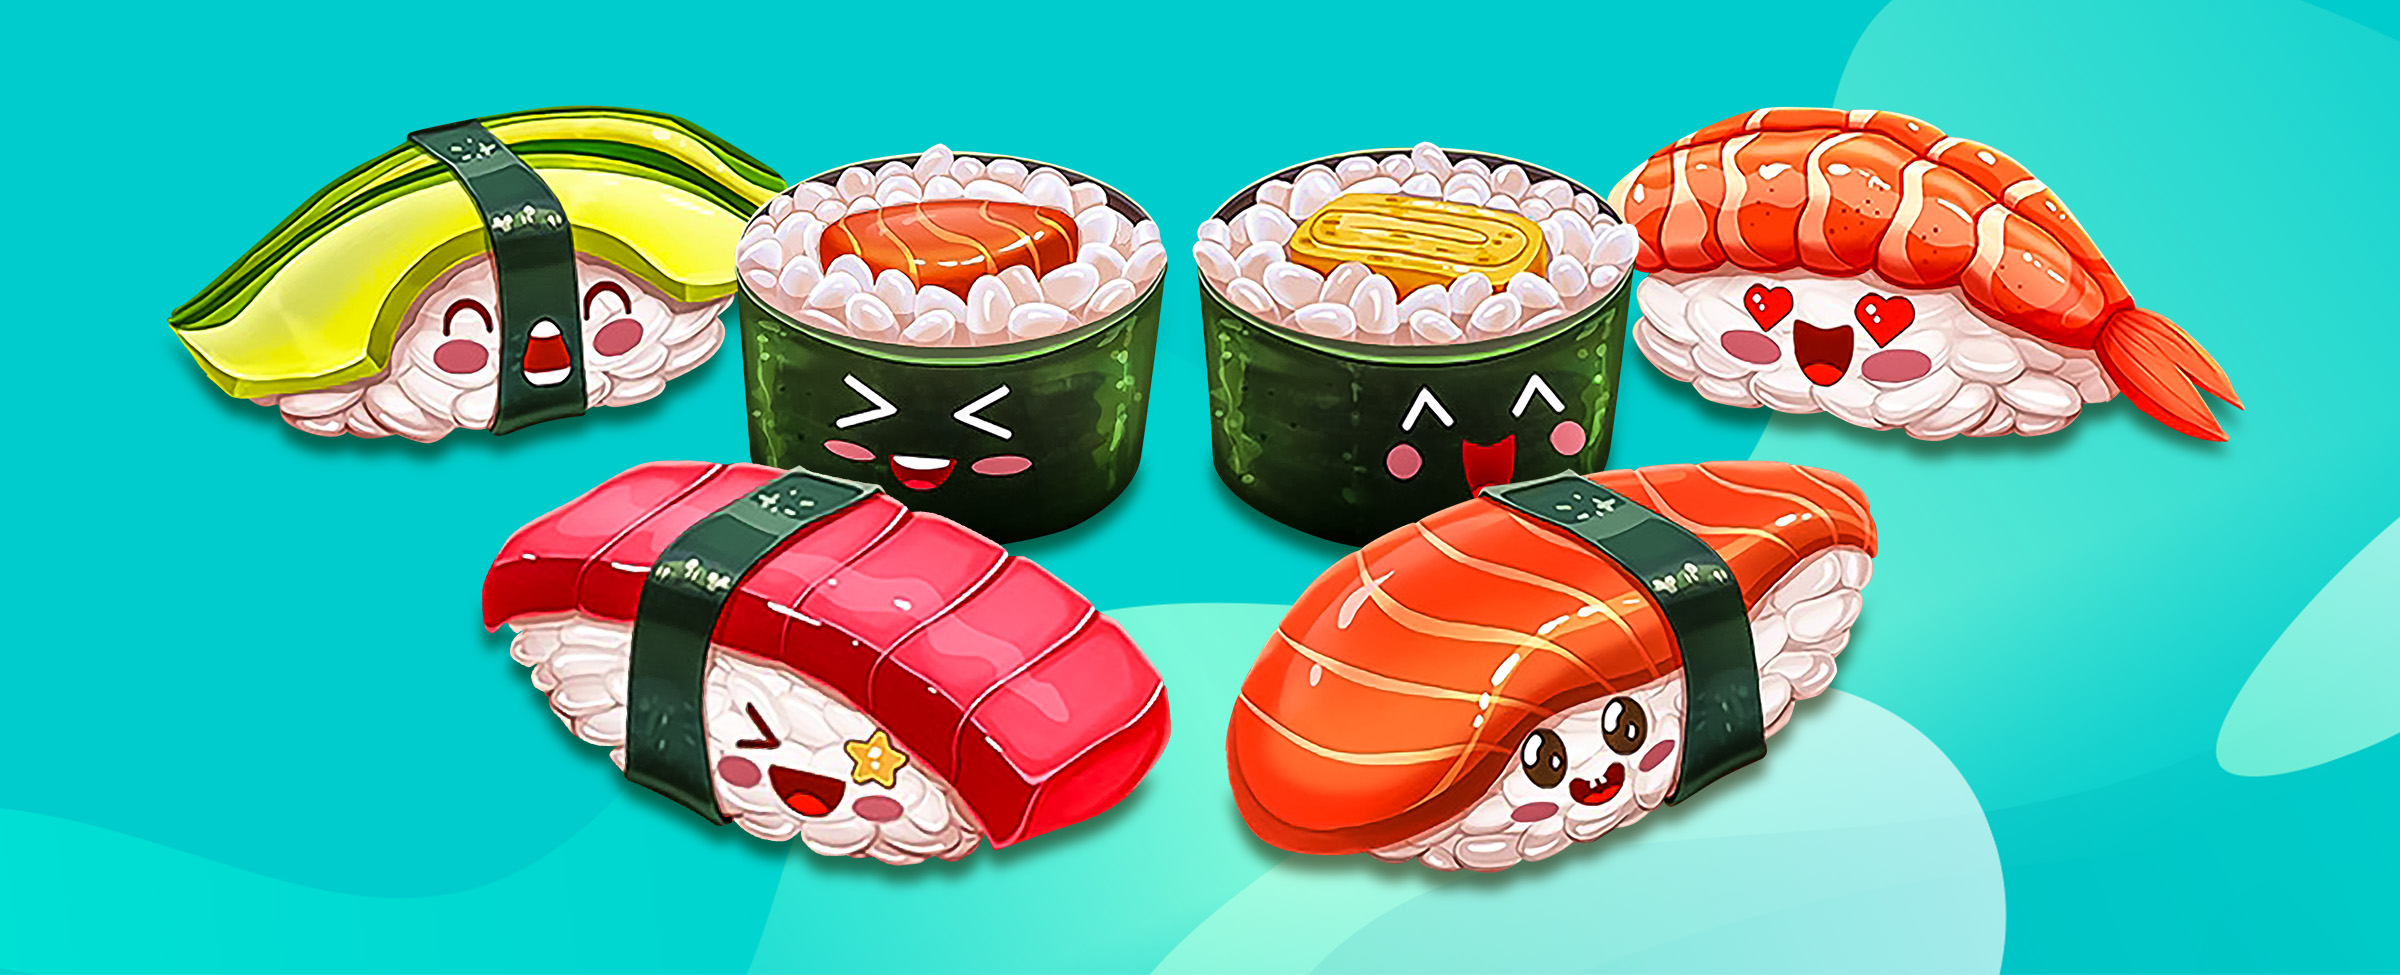 If you’re feeling relaxed, then Sushi Wins is the perfect slot game to try. Find out more.